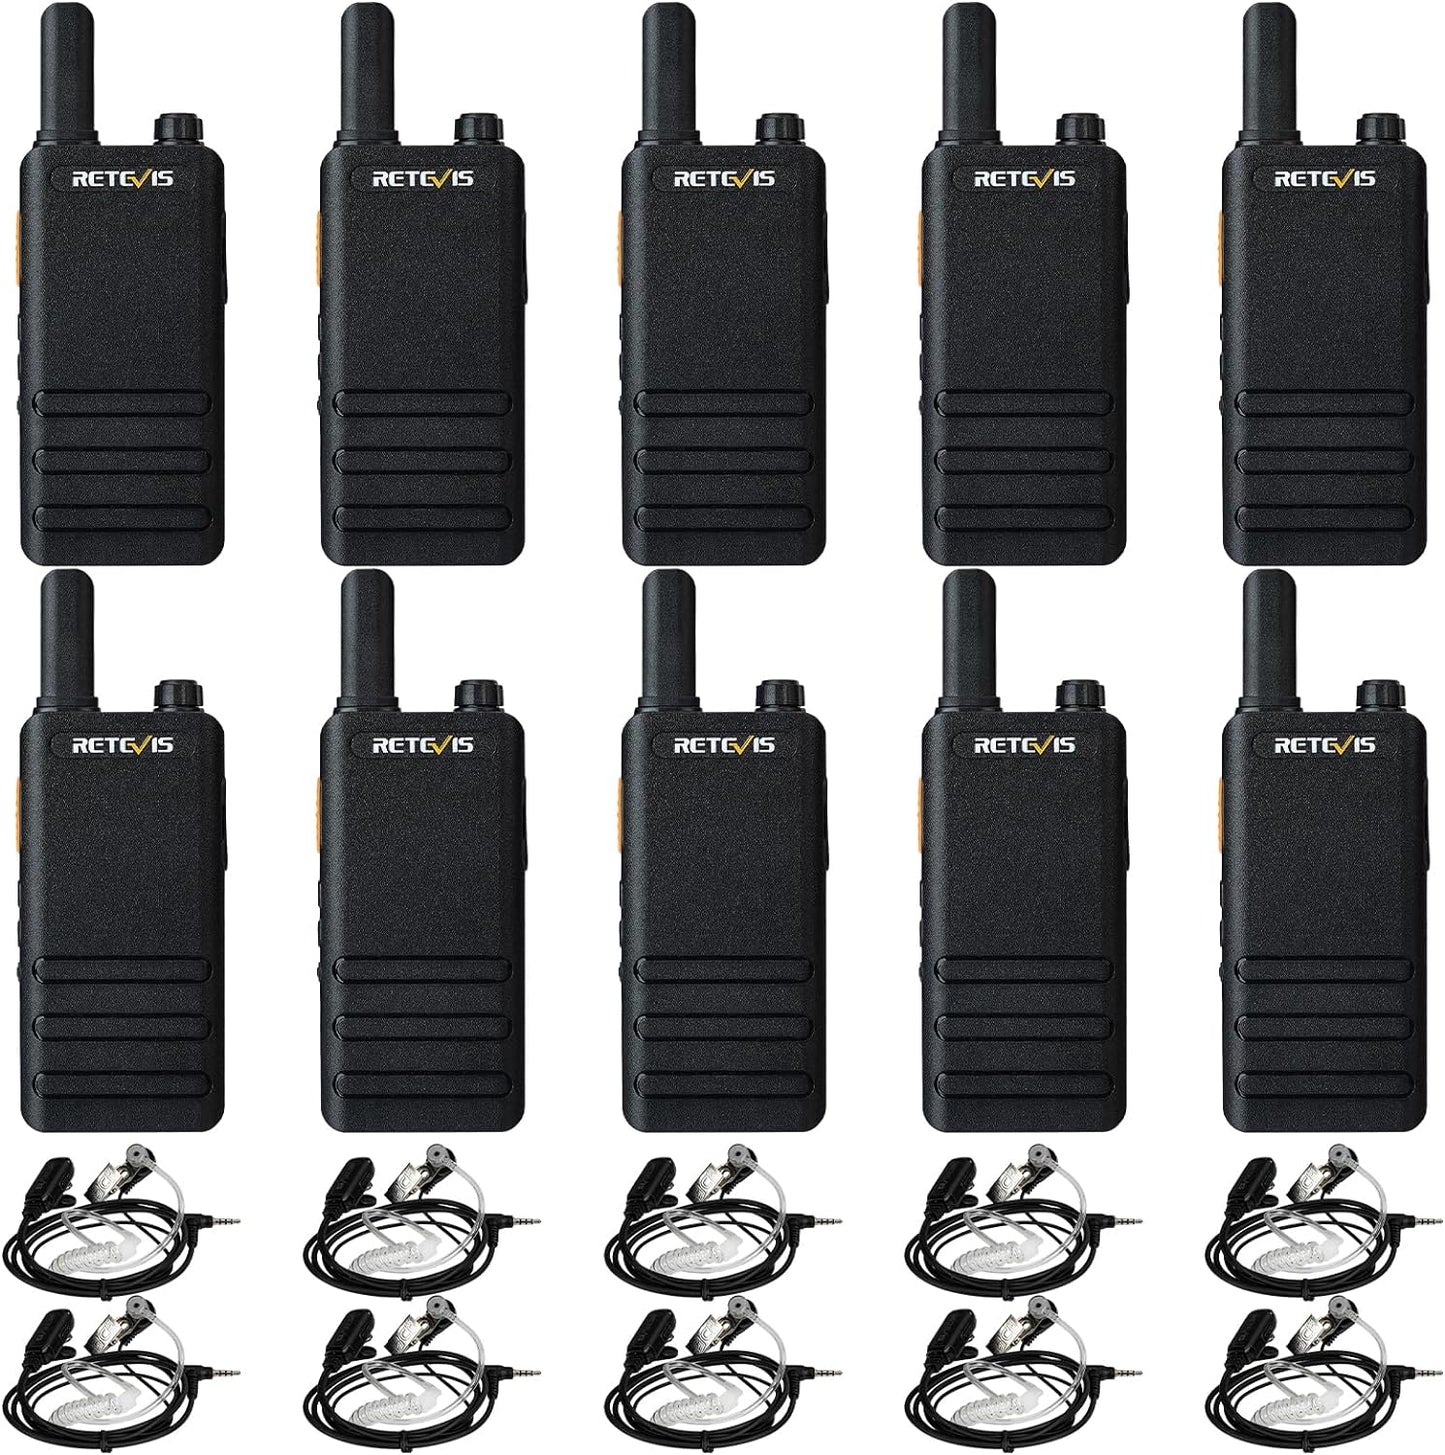 Retevis RT22P 2 Way Radios with Earpiece, New Version RT22,Portable FRS Two-Way Radios,1620mAh Battery,VOX Handsfree,Rechargeable Walkie Talkies for Adu